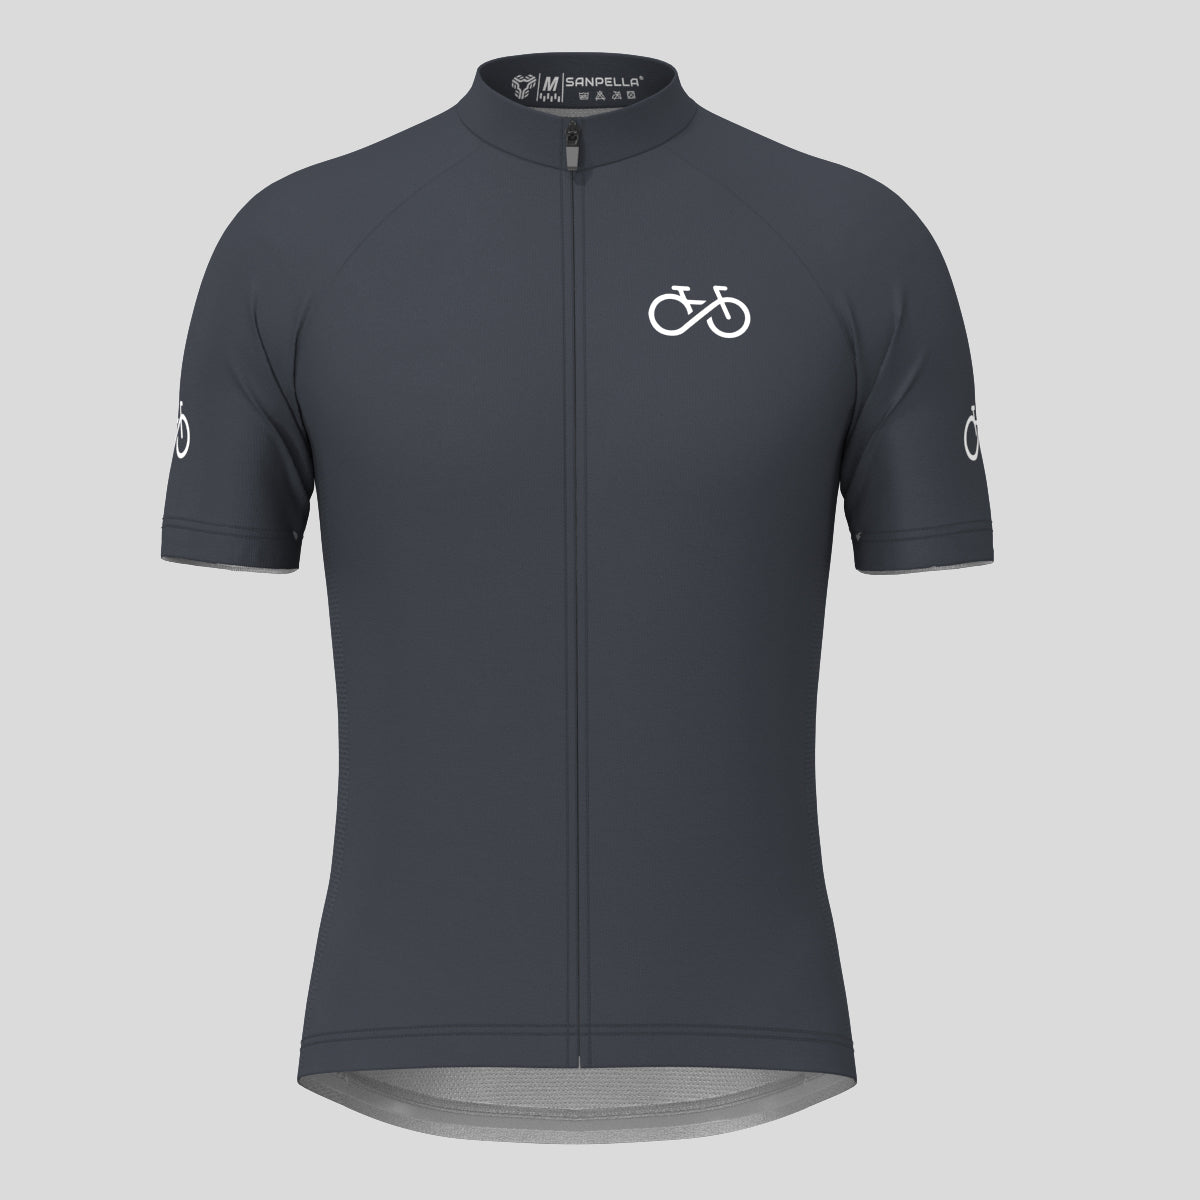 Ride Forever Men's Cycling Jersey -Graphite